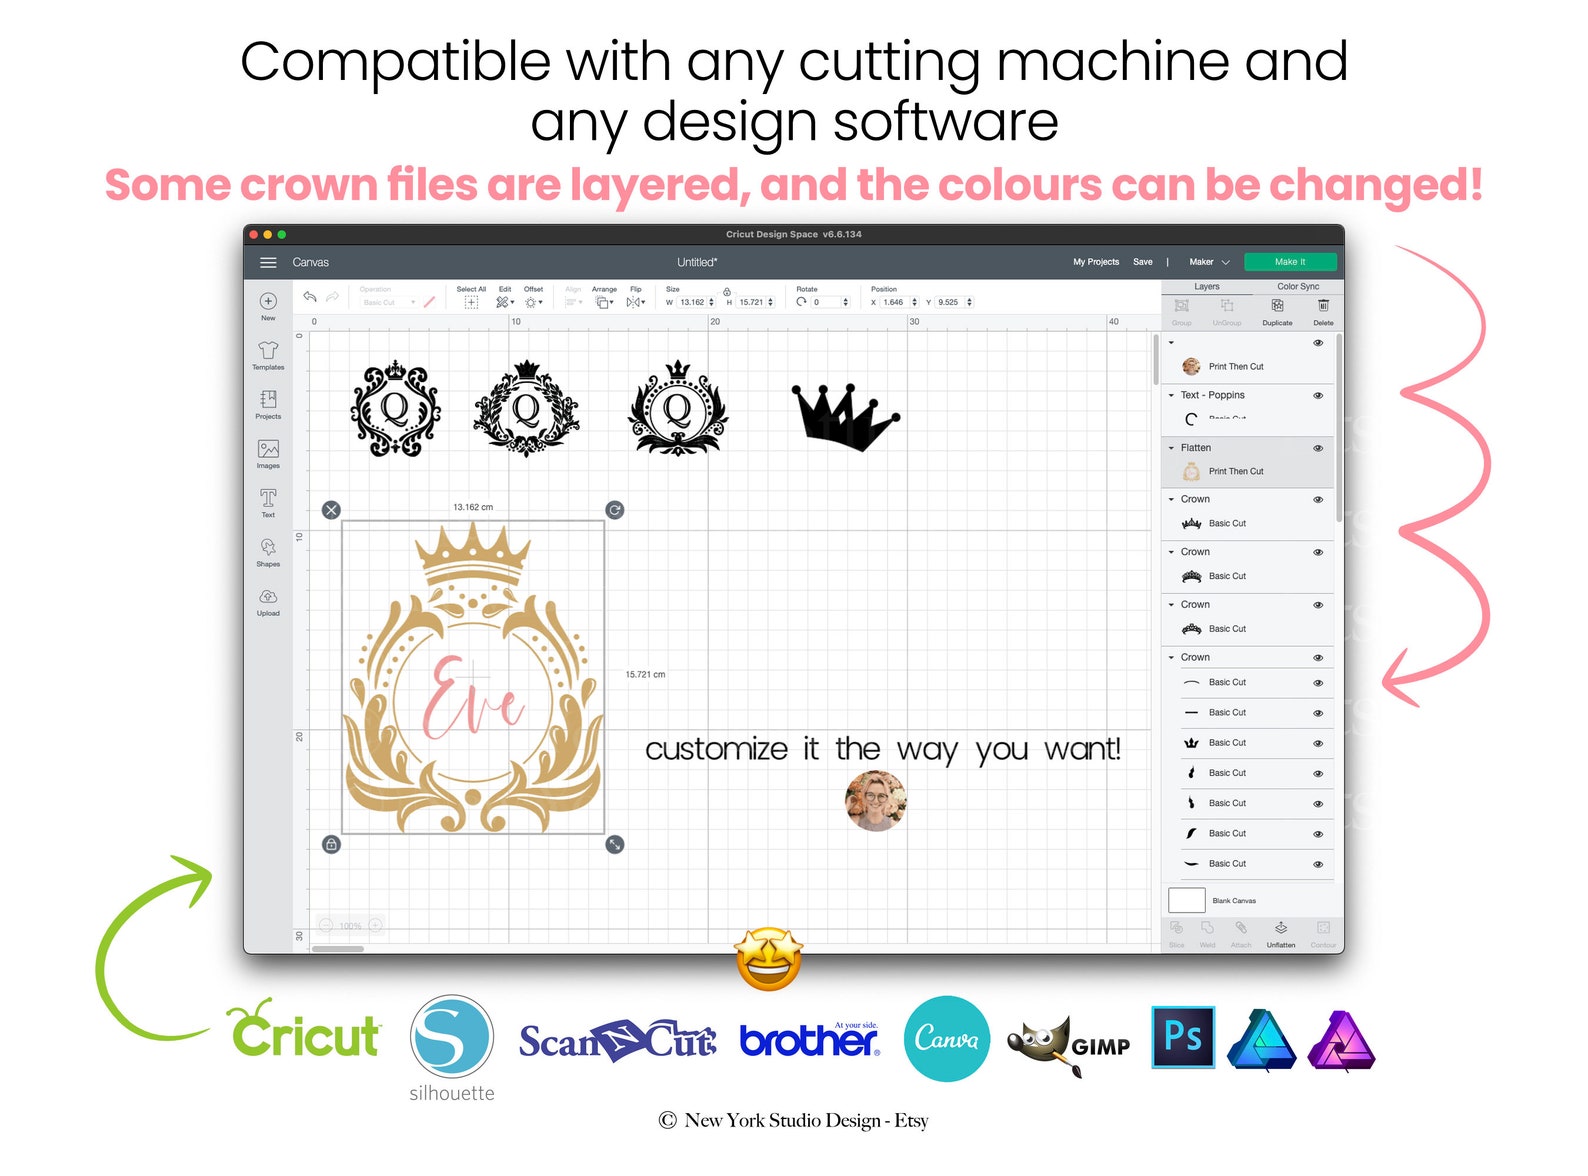 Compatibility with any cutting machine and any design software.